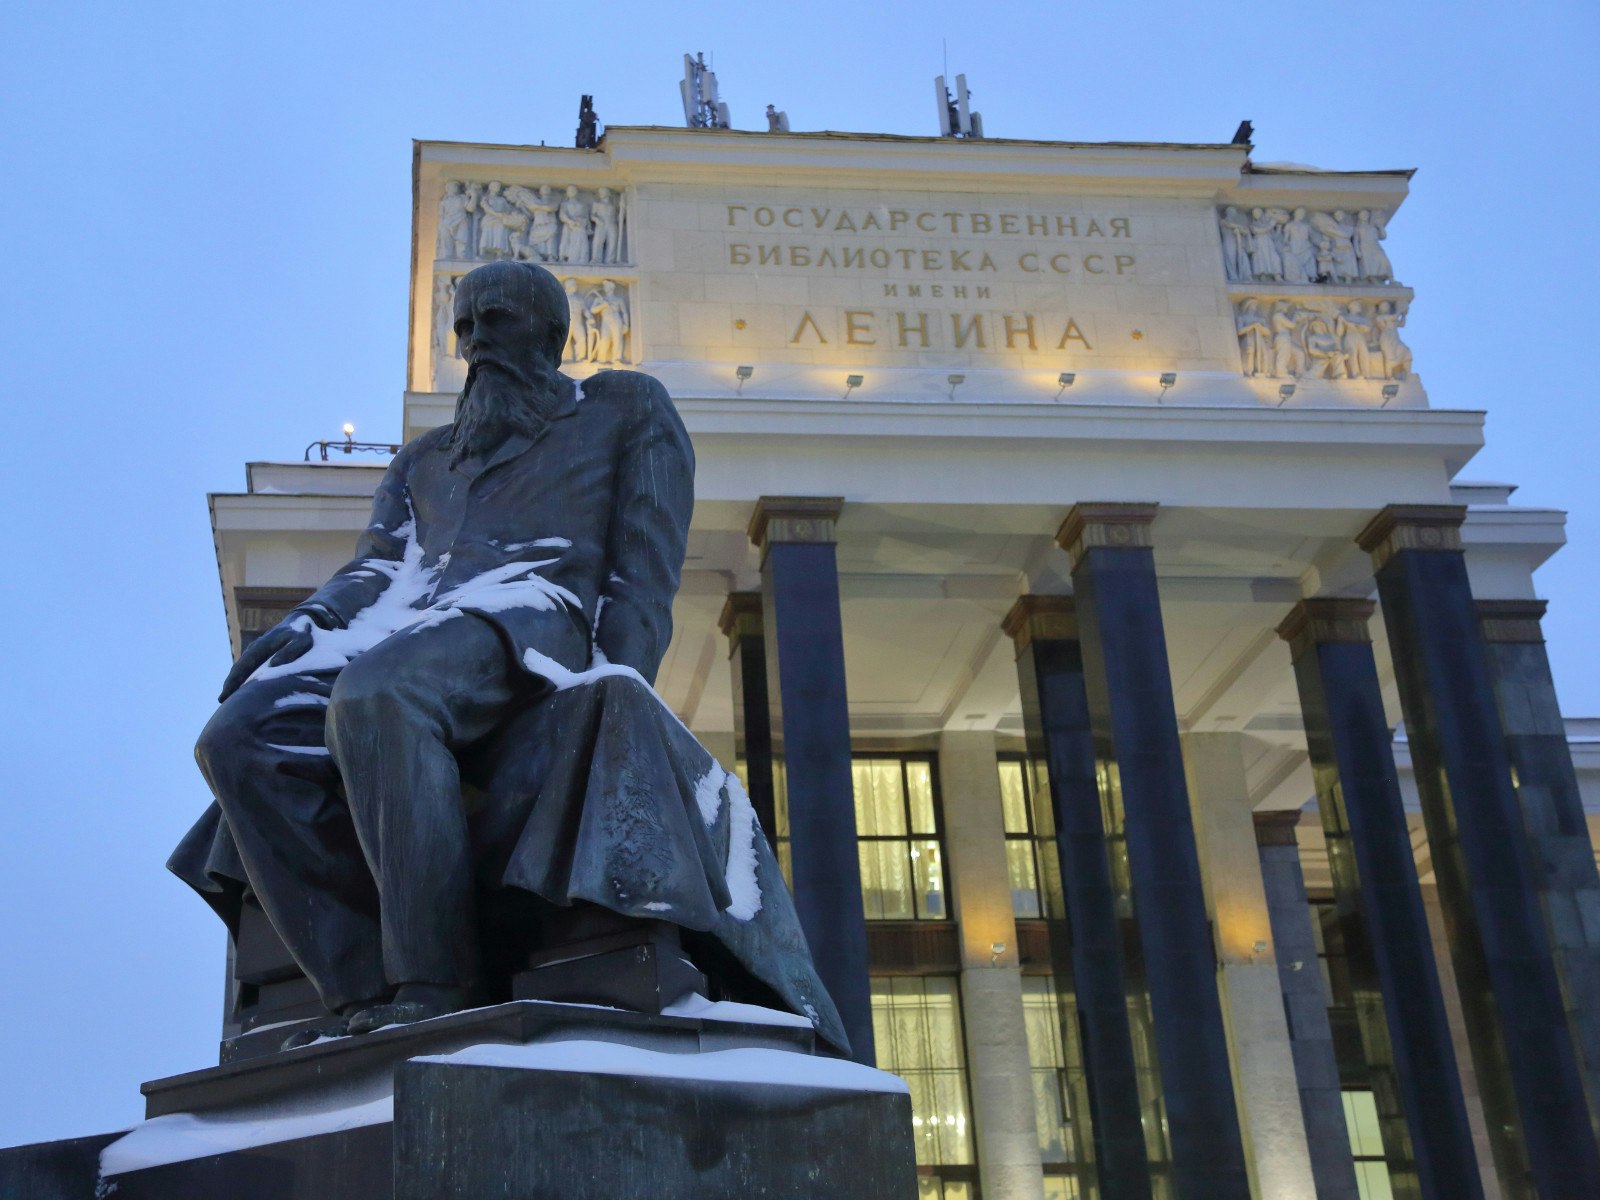 The monument to writer Fyodor Dostoevsky in front of the Russian State Library in Moscow © Lagutkin Alexey / Shutterstock